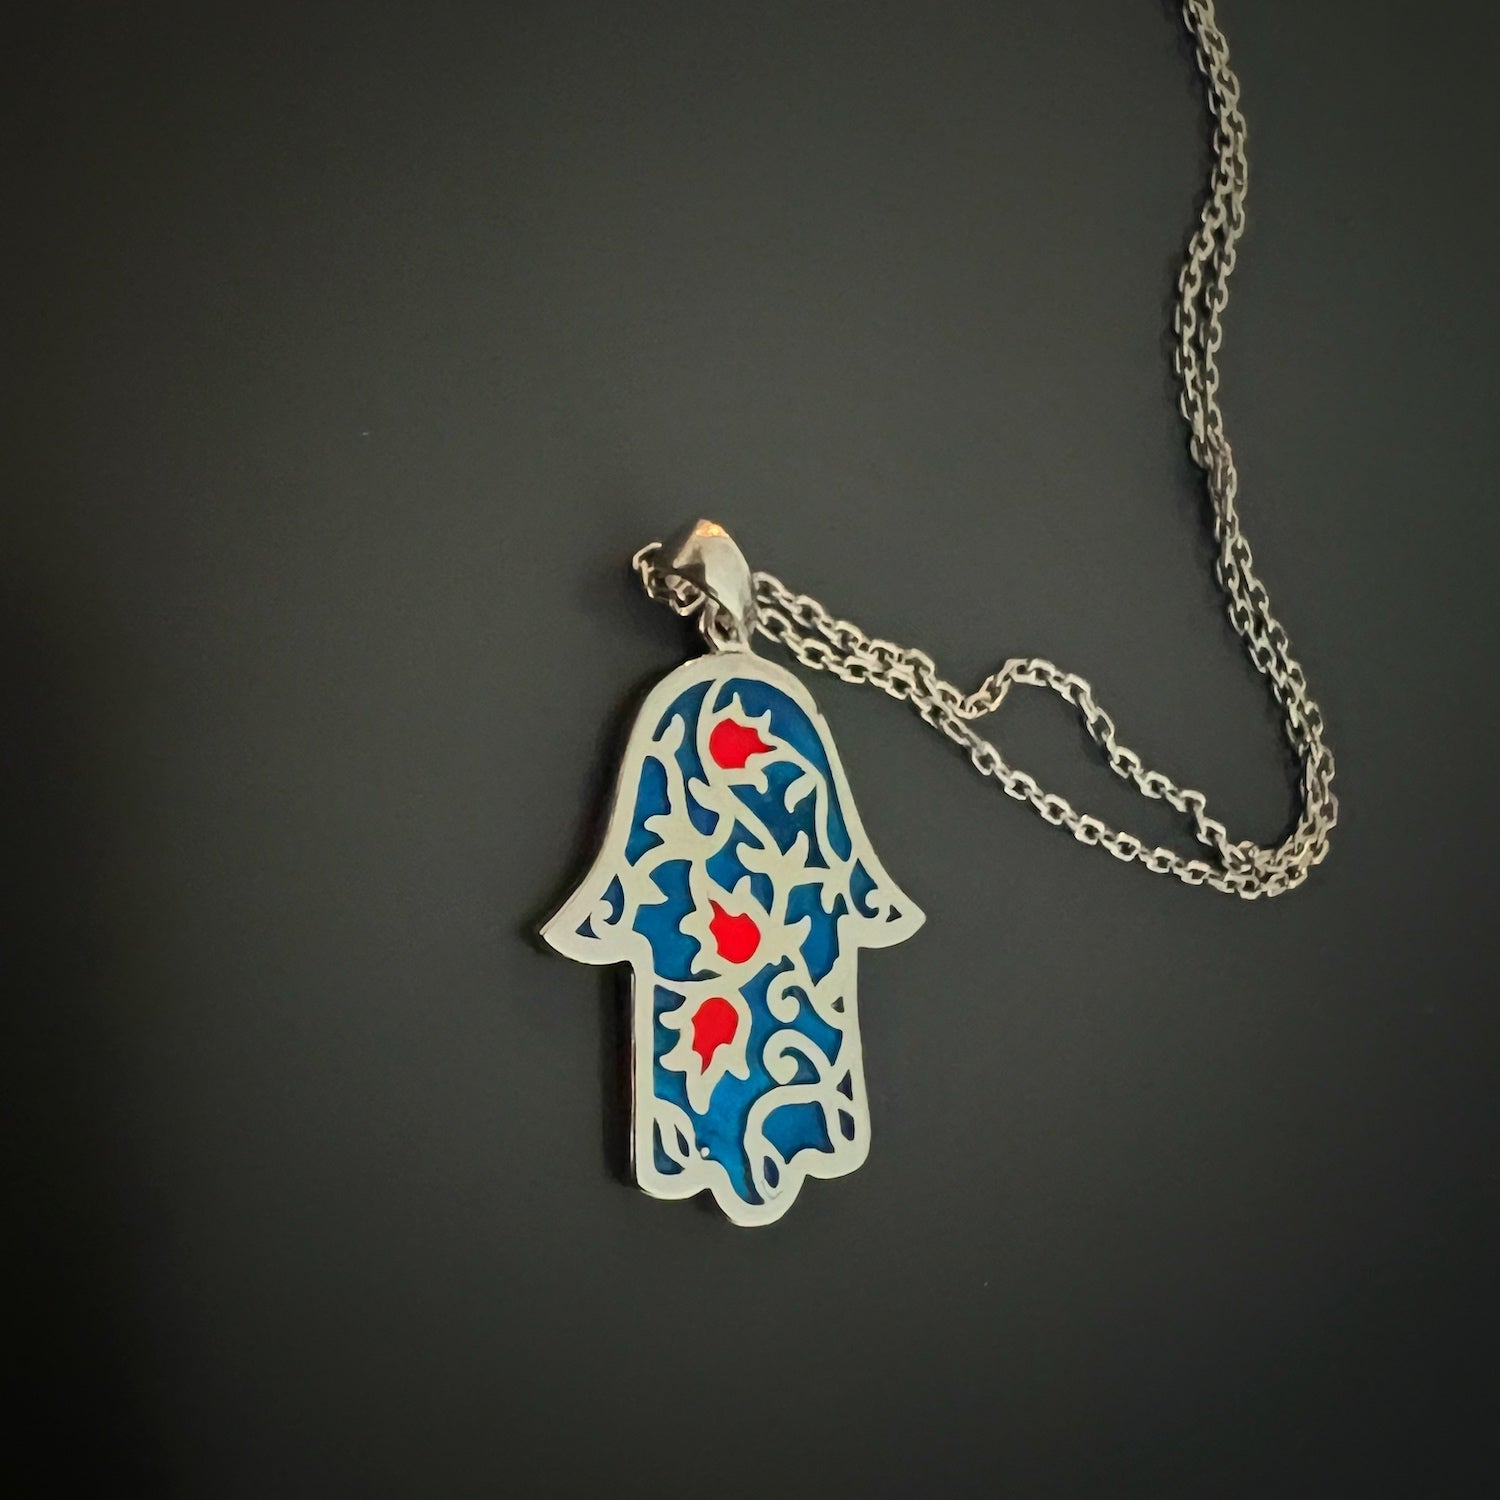 A detailed shot of the beautifully crafted Hamsa pendant on the Good Vibes Enamel Hamsa Necklace Silver.